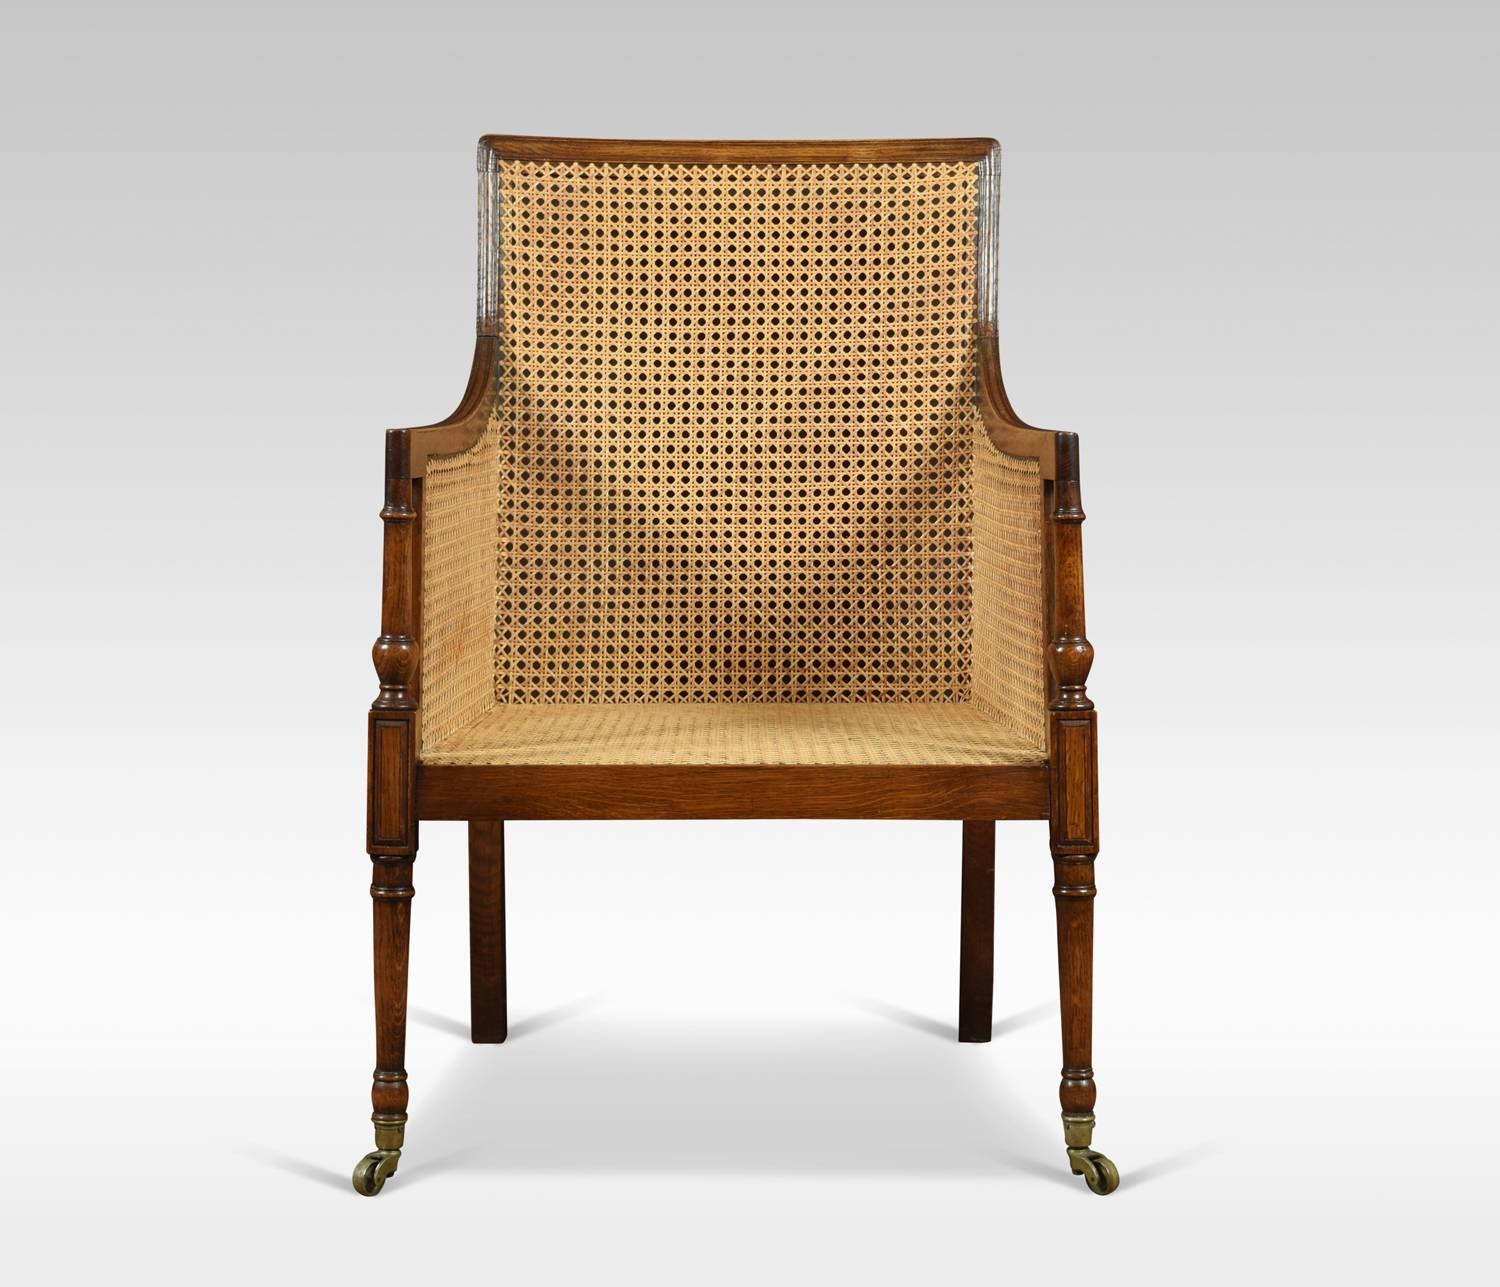 Bergère armchair, the solid oak frame and inset bergère back and seat with removable black leather cushion. Raised up on turned tapering legs. Terminating in brass caps and castors.

Dimensions
Height 36 inches, height to seat 17 inches
Width 23